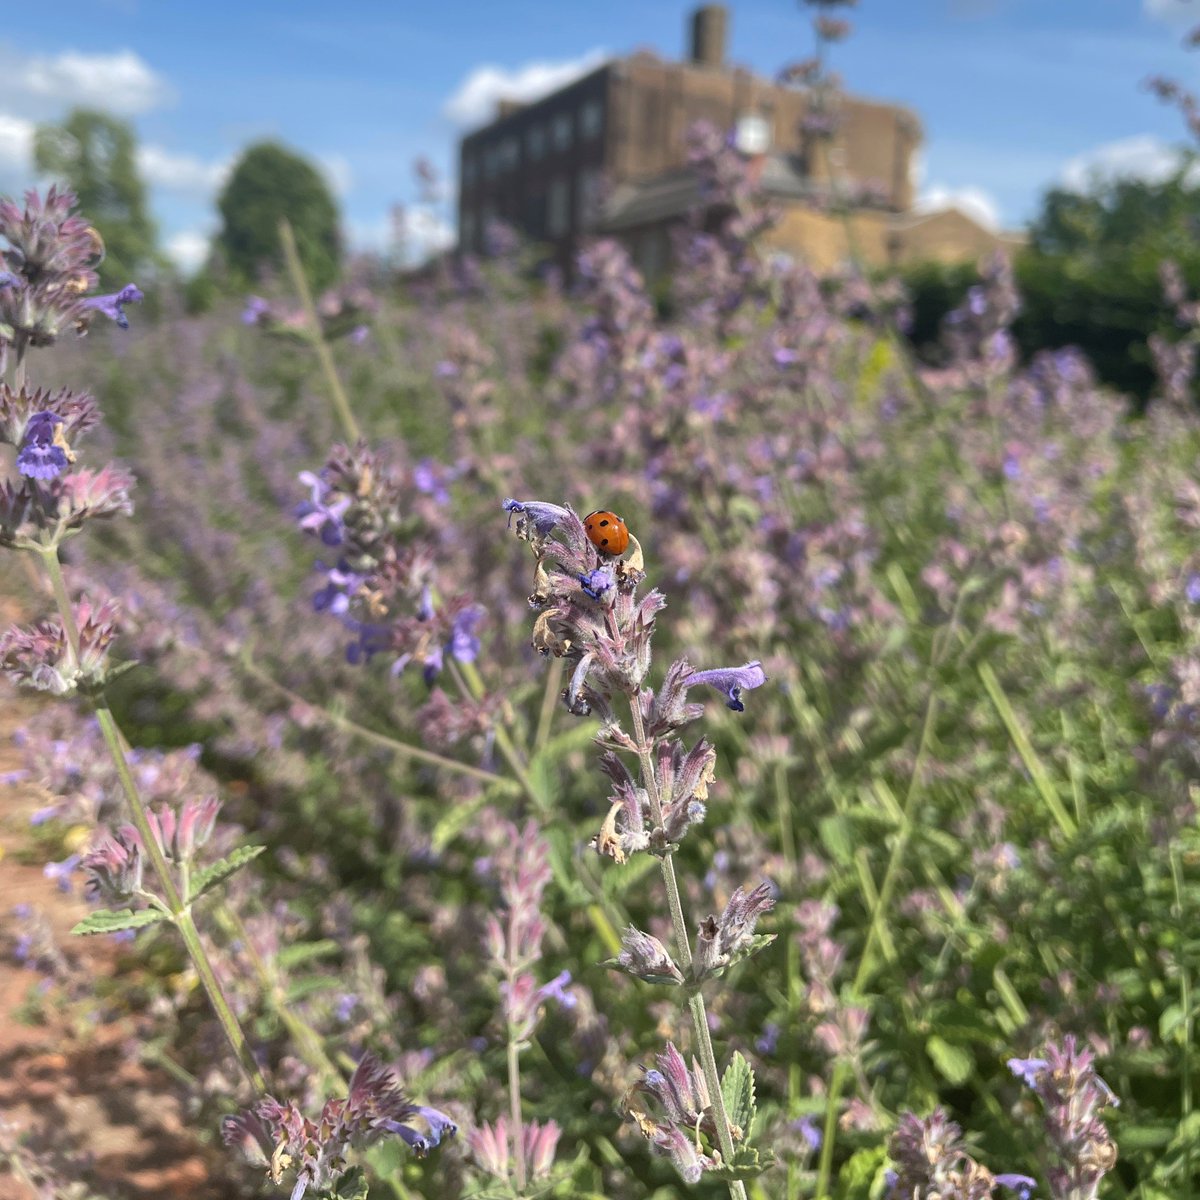 🐞Discover how nature and biodiversity can flourish in urban environments at the Wild(er) Walthamstow exhibition. Join @bluegreenE17 at Winns Gallery in Lloyd Park from June 30th - July 2nd 10am - 5pm to explore connections in with nature in E17🌼bit.ly/bluegreene17